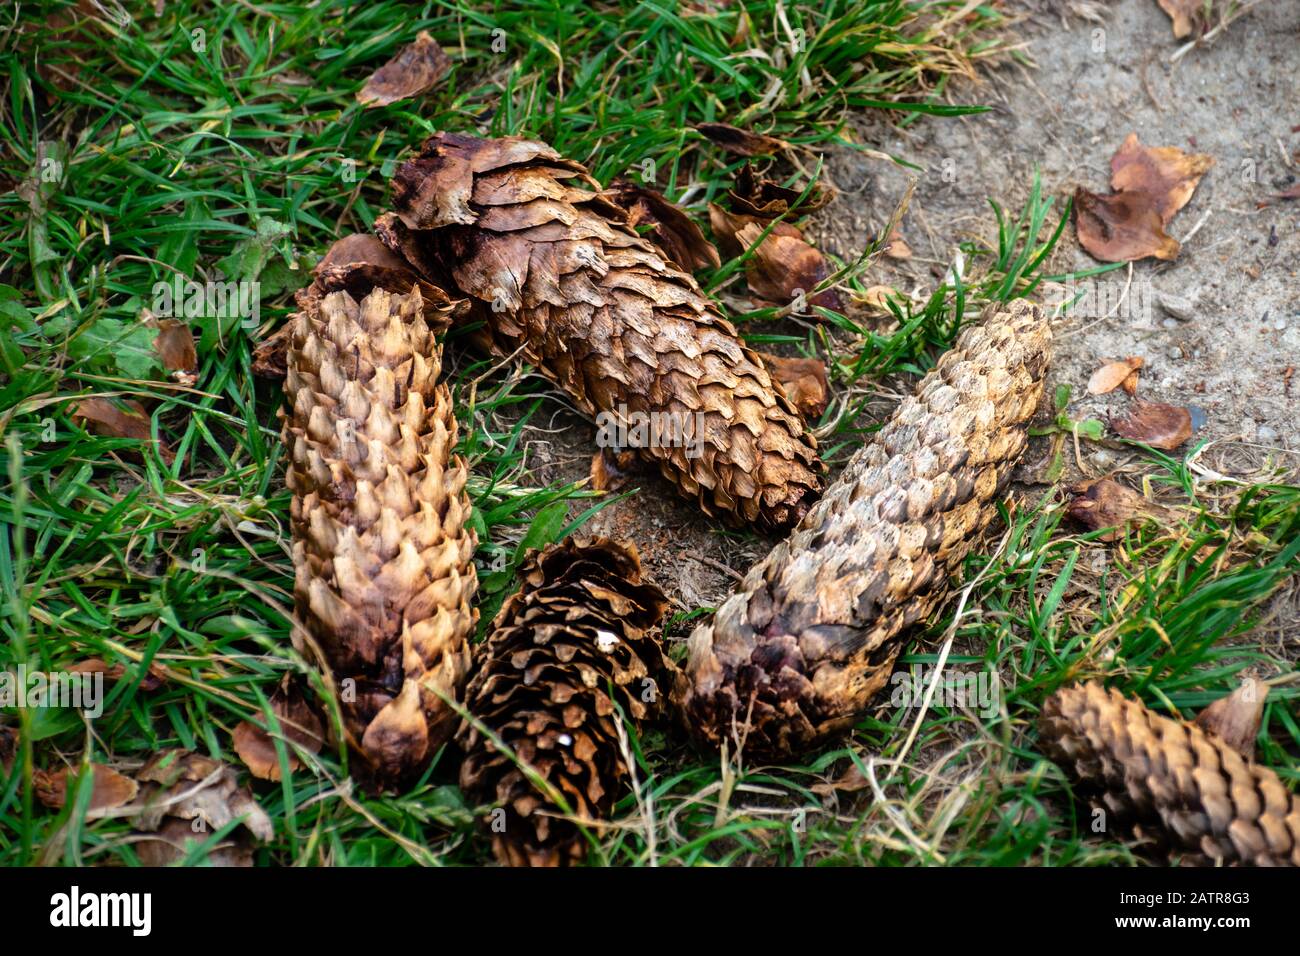 Some fir / pine cones lying on the ground. Stock Photo